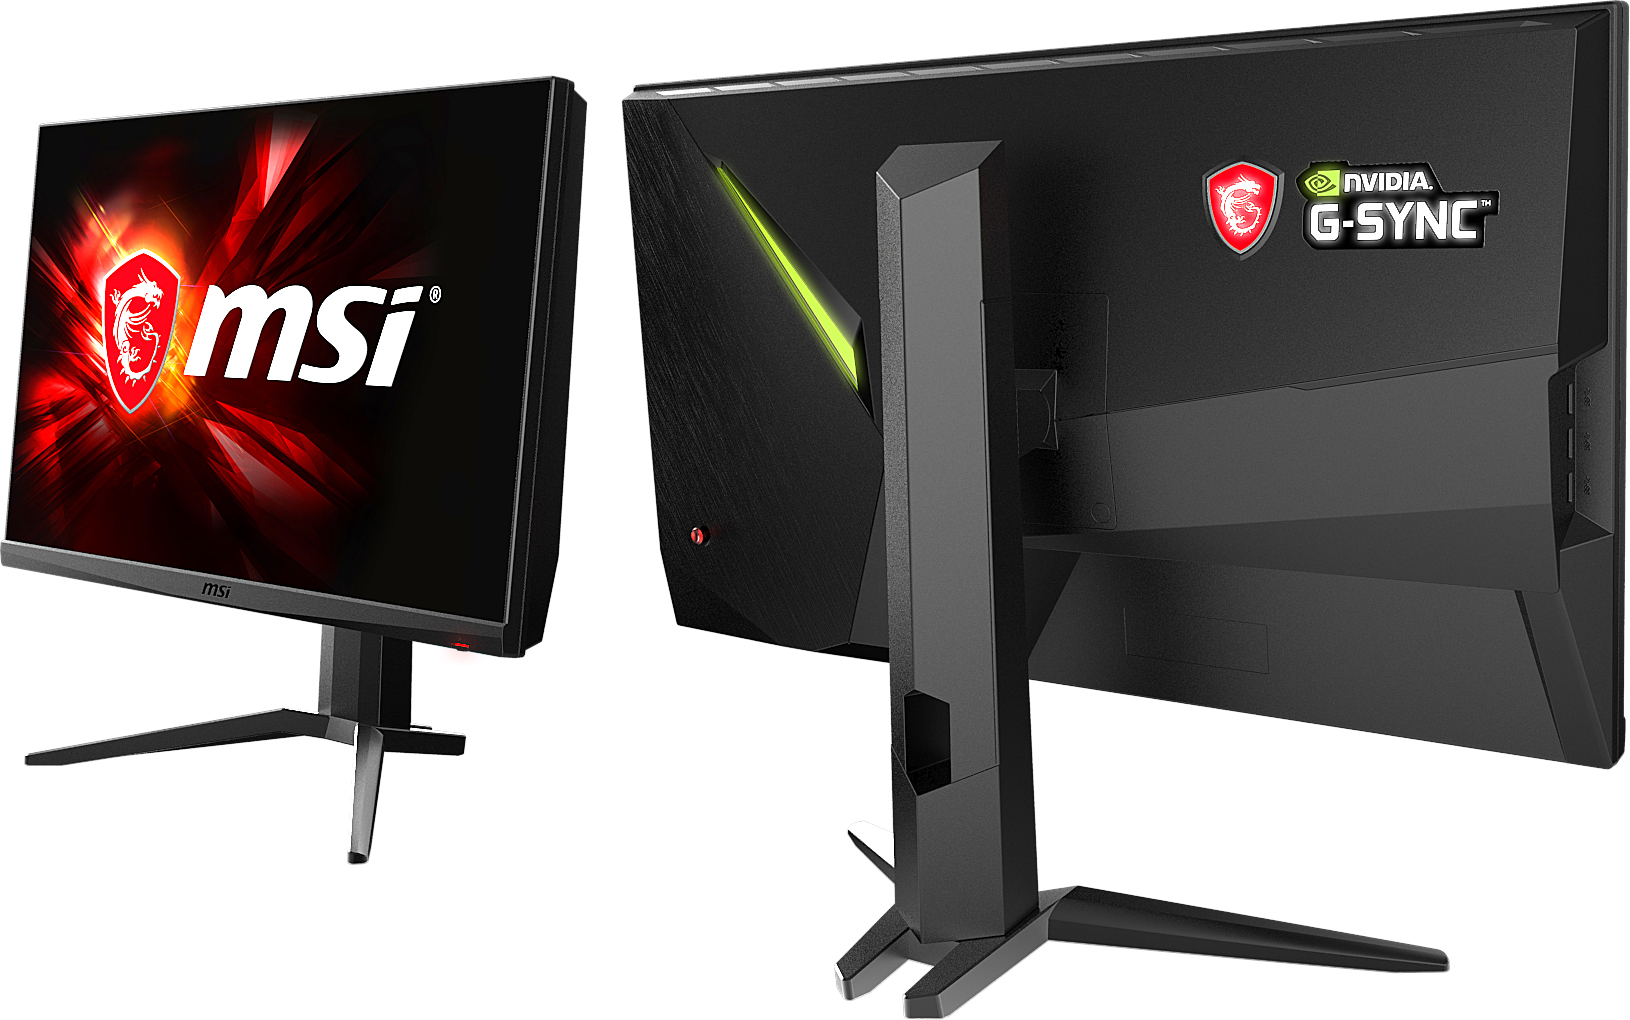 The smoothest and clearest viewing gaming monitor, dedicated for eSport PRO gamer